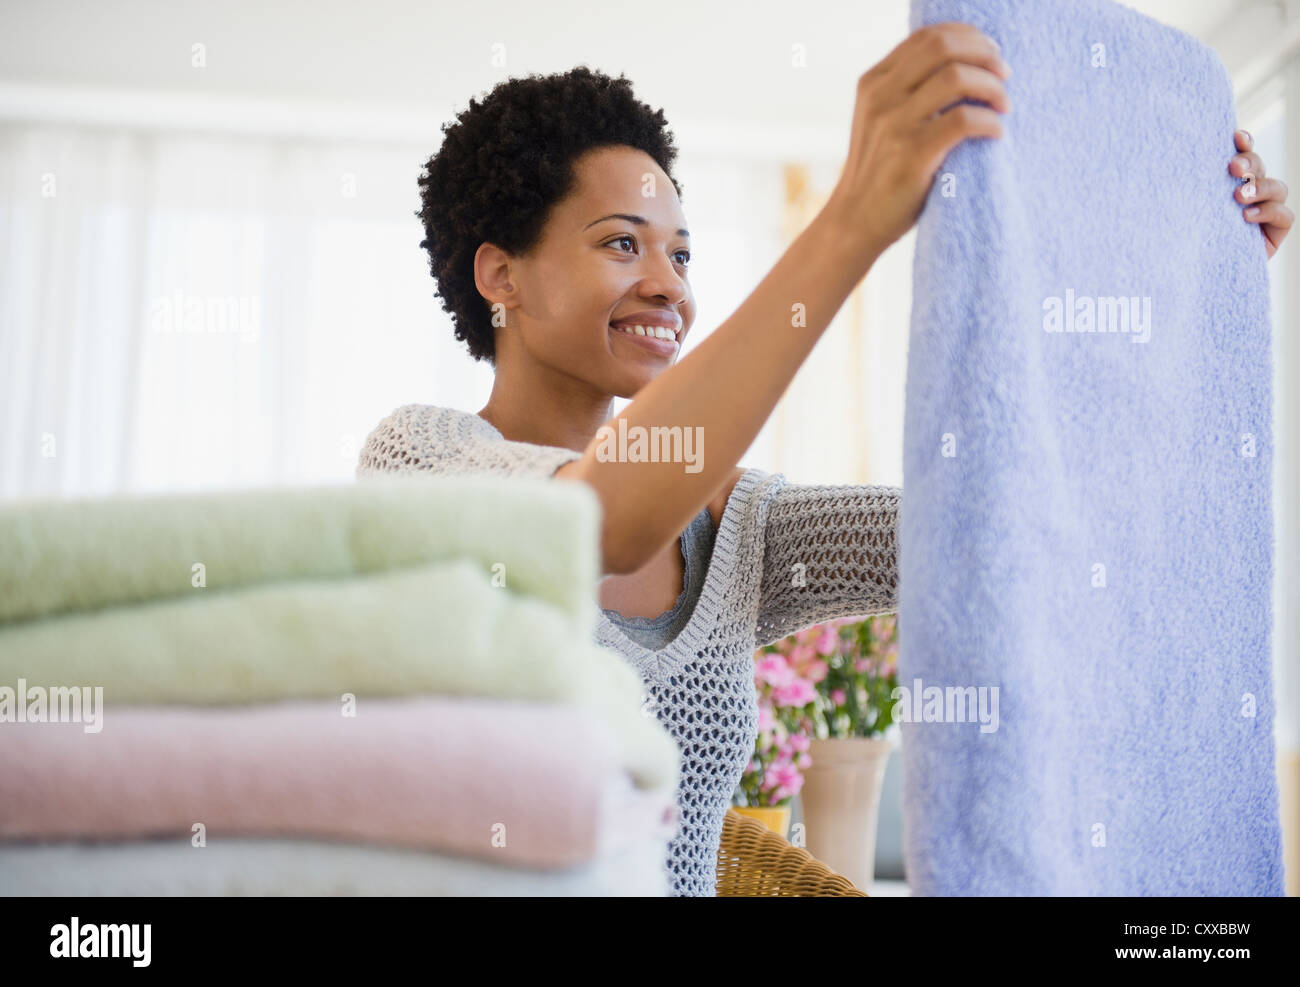 African American woman folding towels Stock Photo